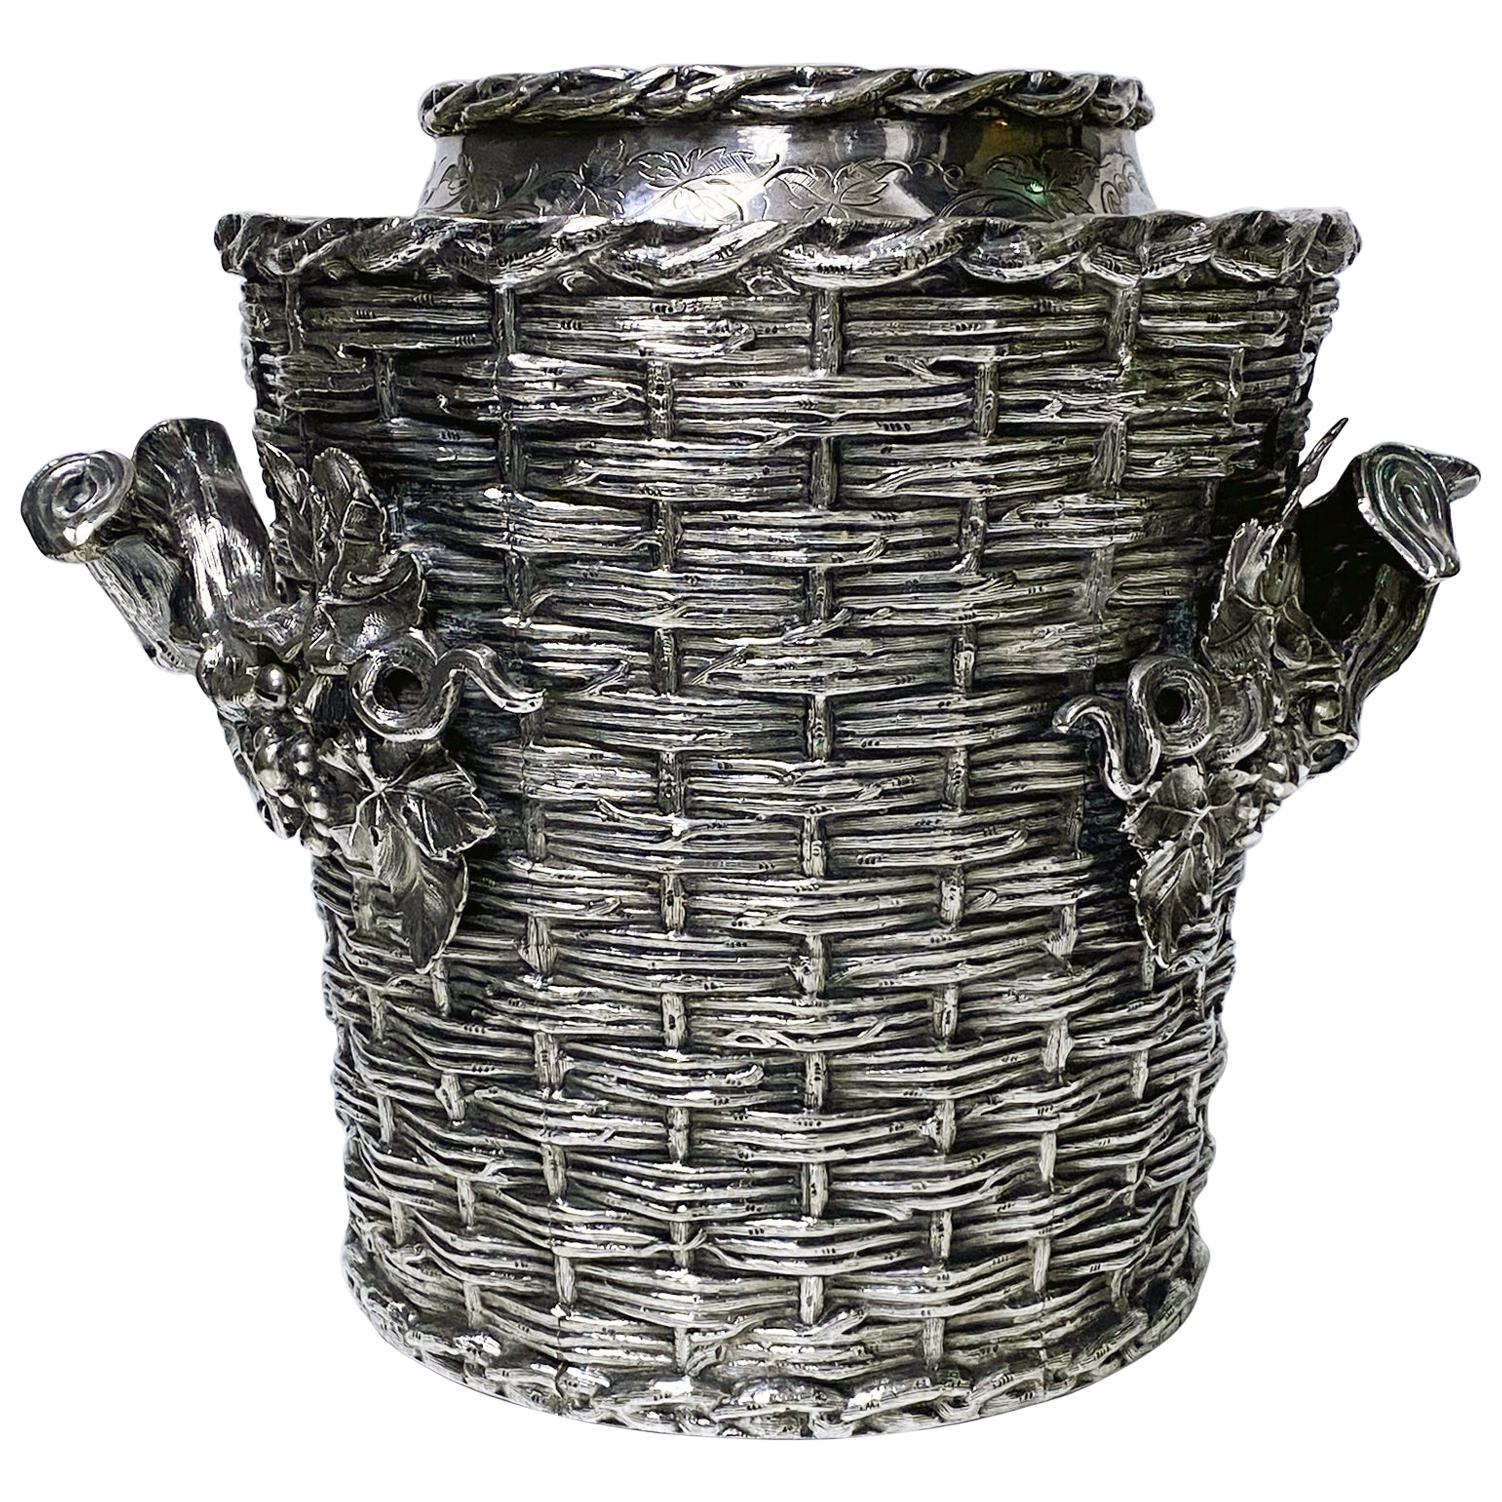 Antique Silver Plated "Trompe L'oeil" Wine Cooler Bucket, England, circa 1880